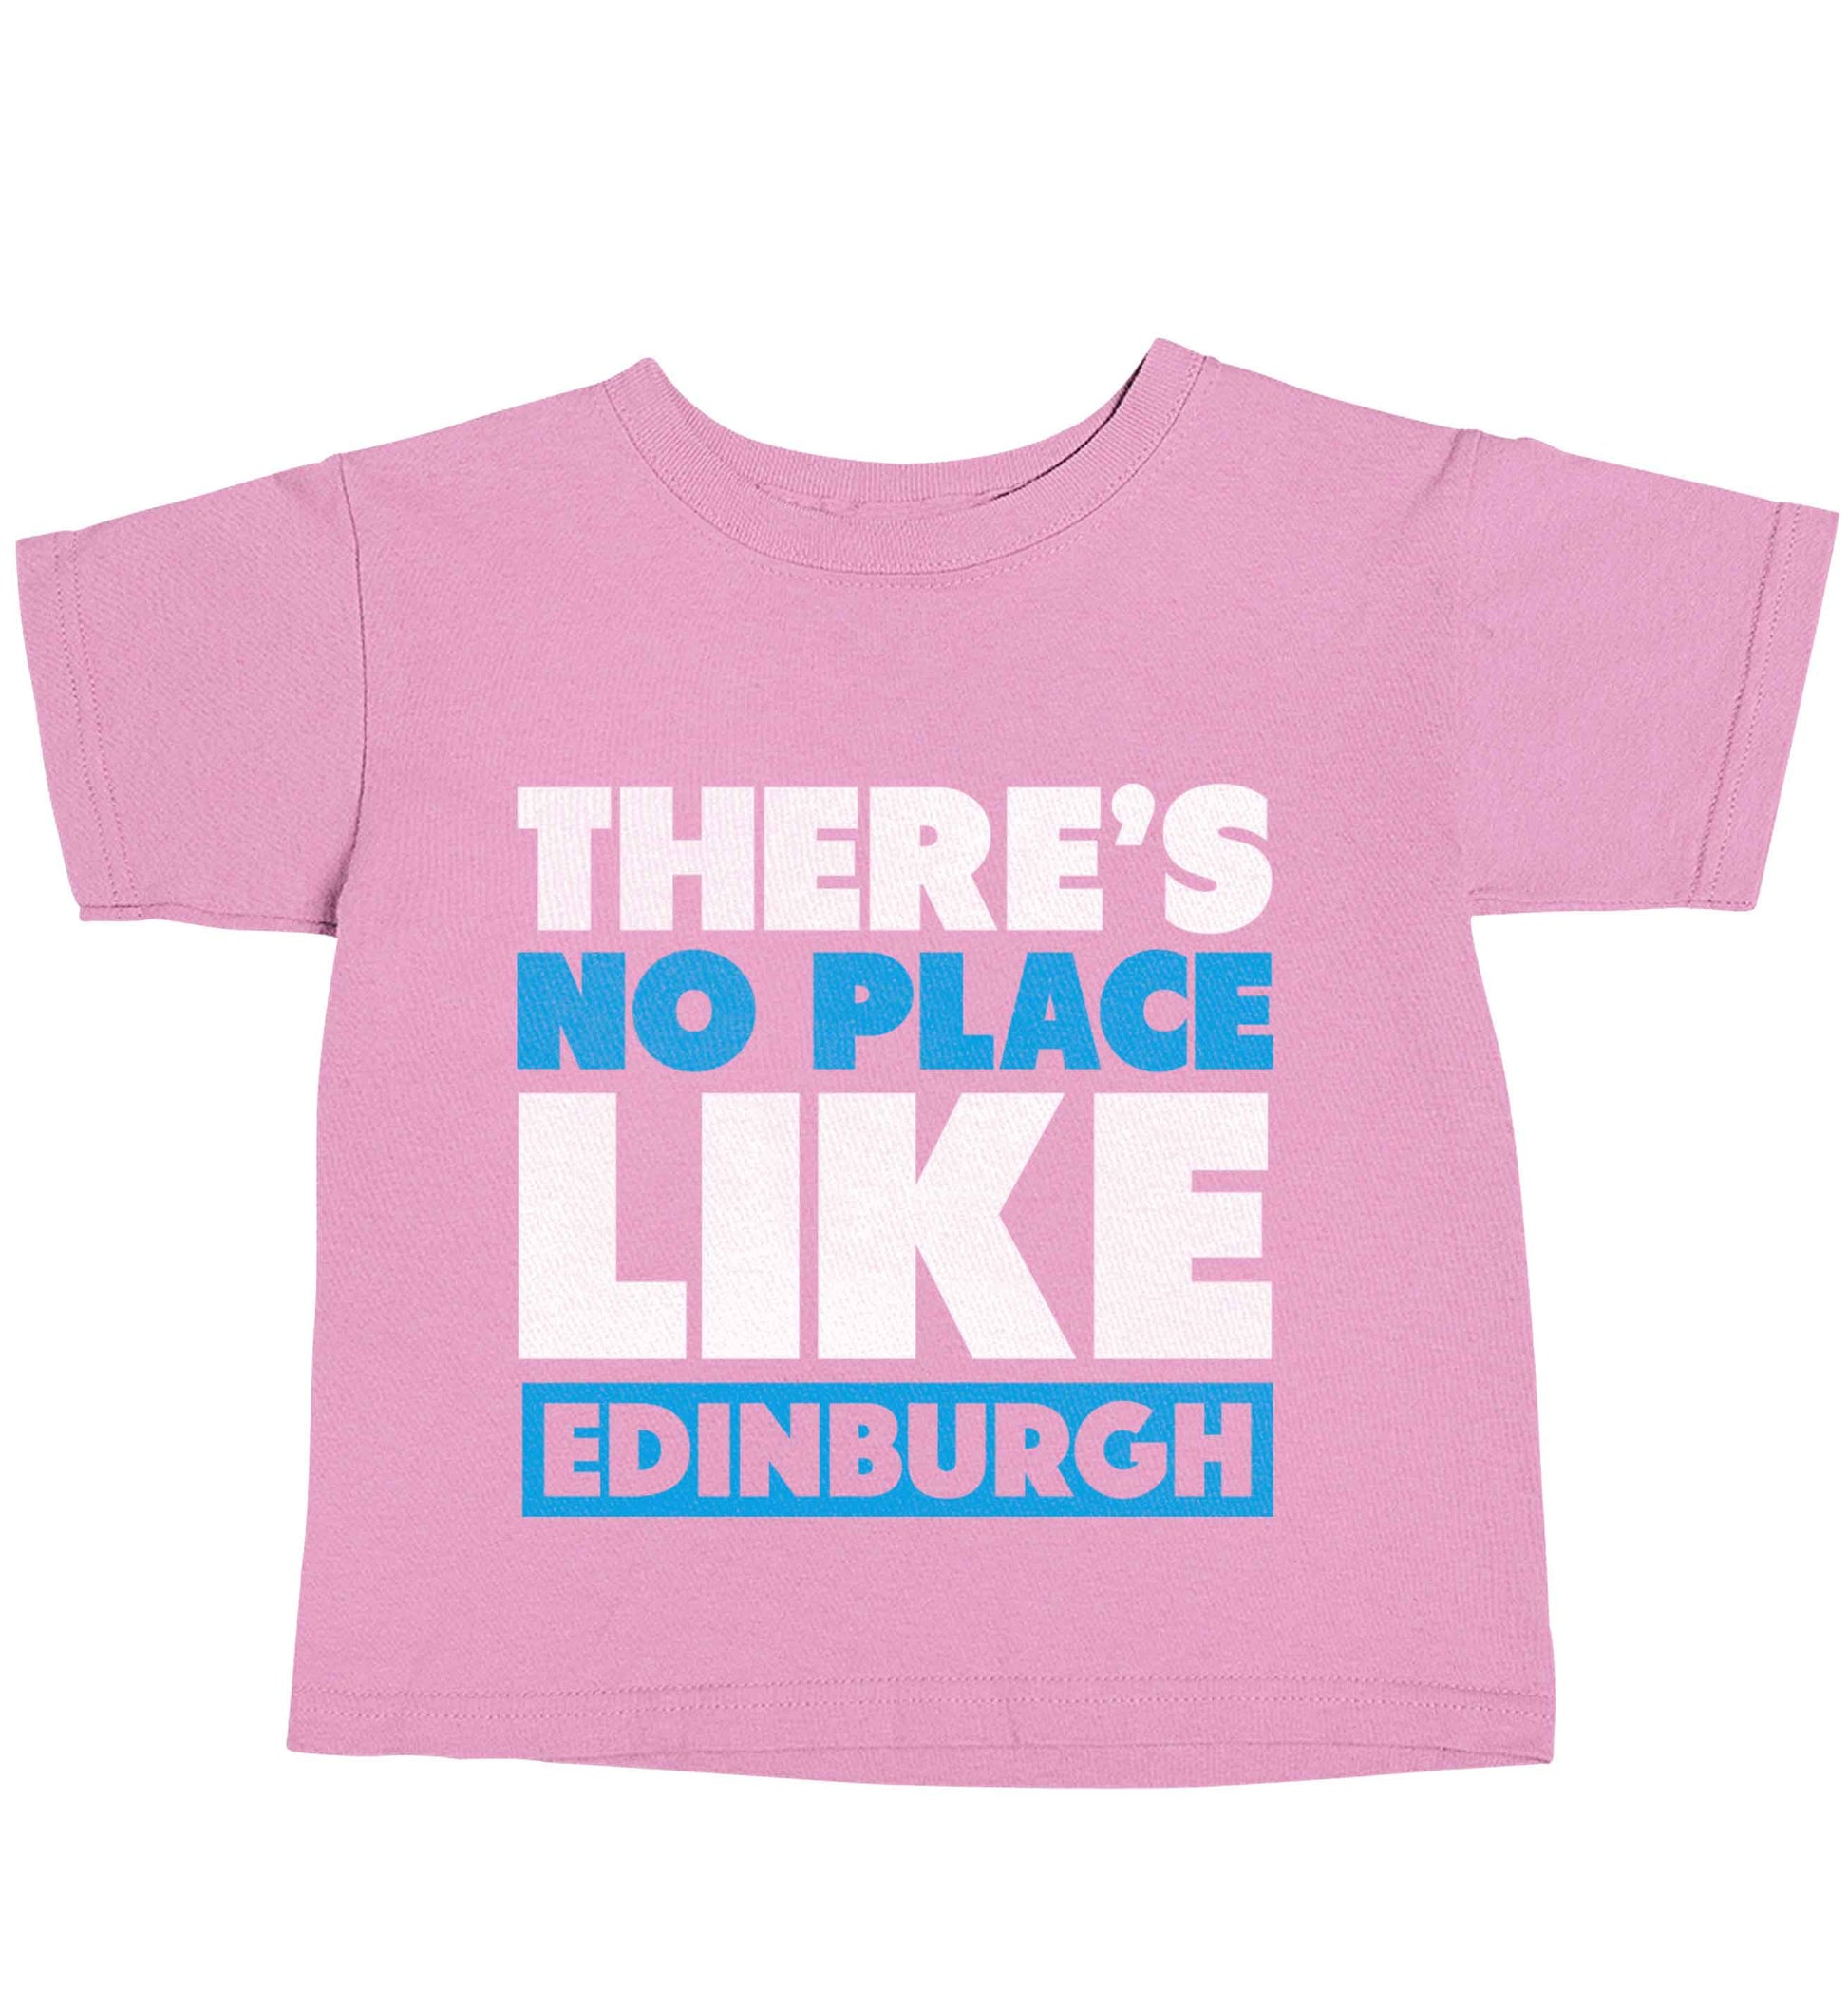 There's no place like Edinburgh light pink baby toddler Tshirt 2 Years